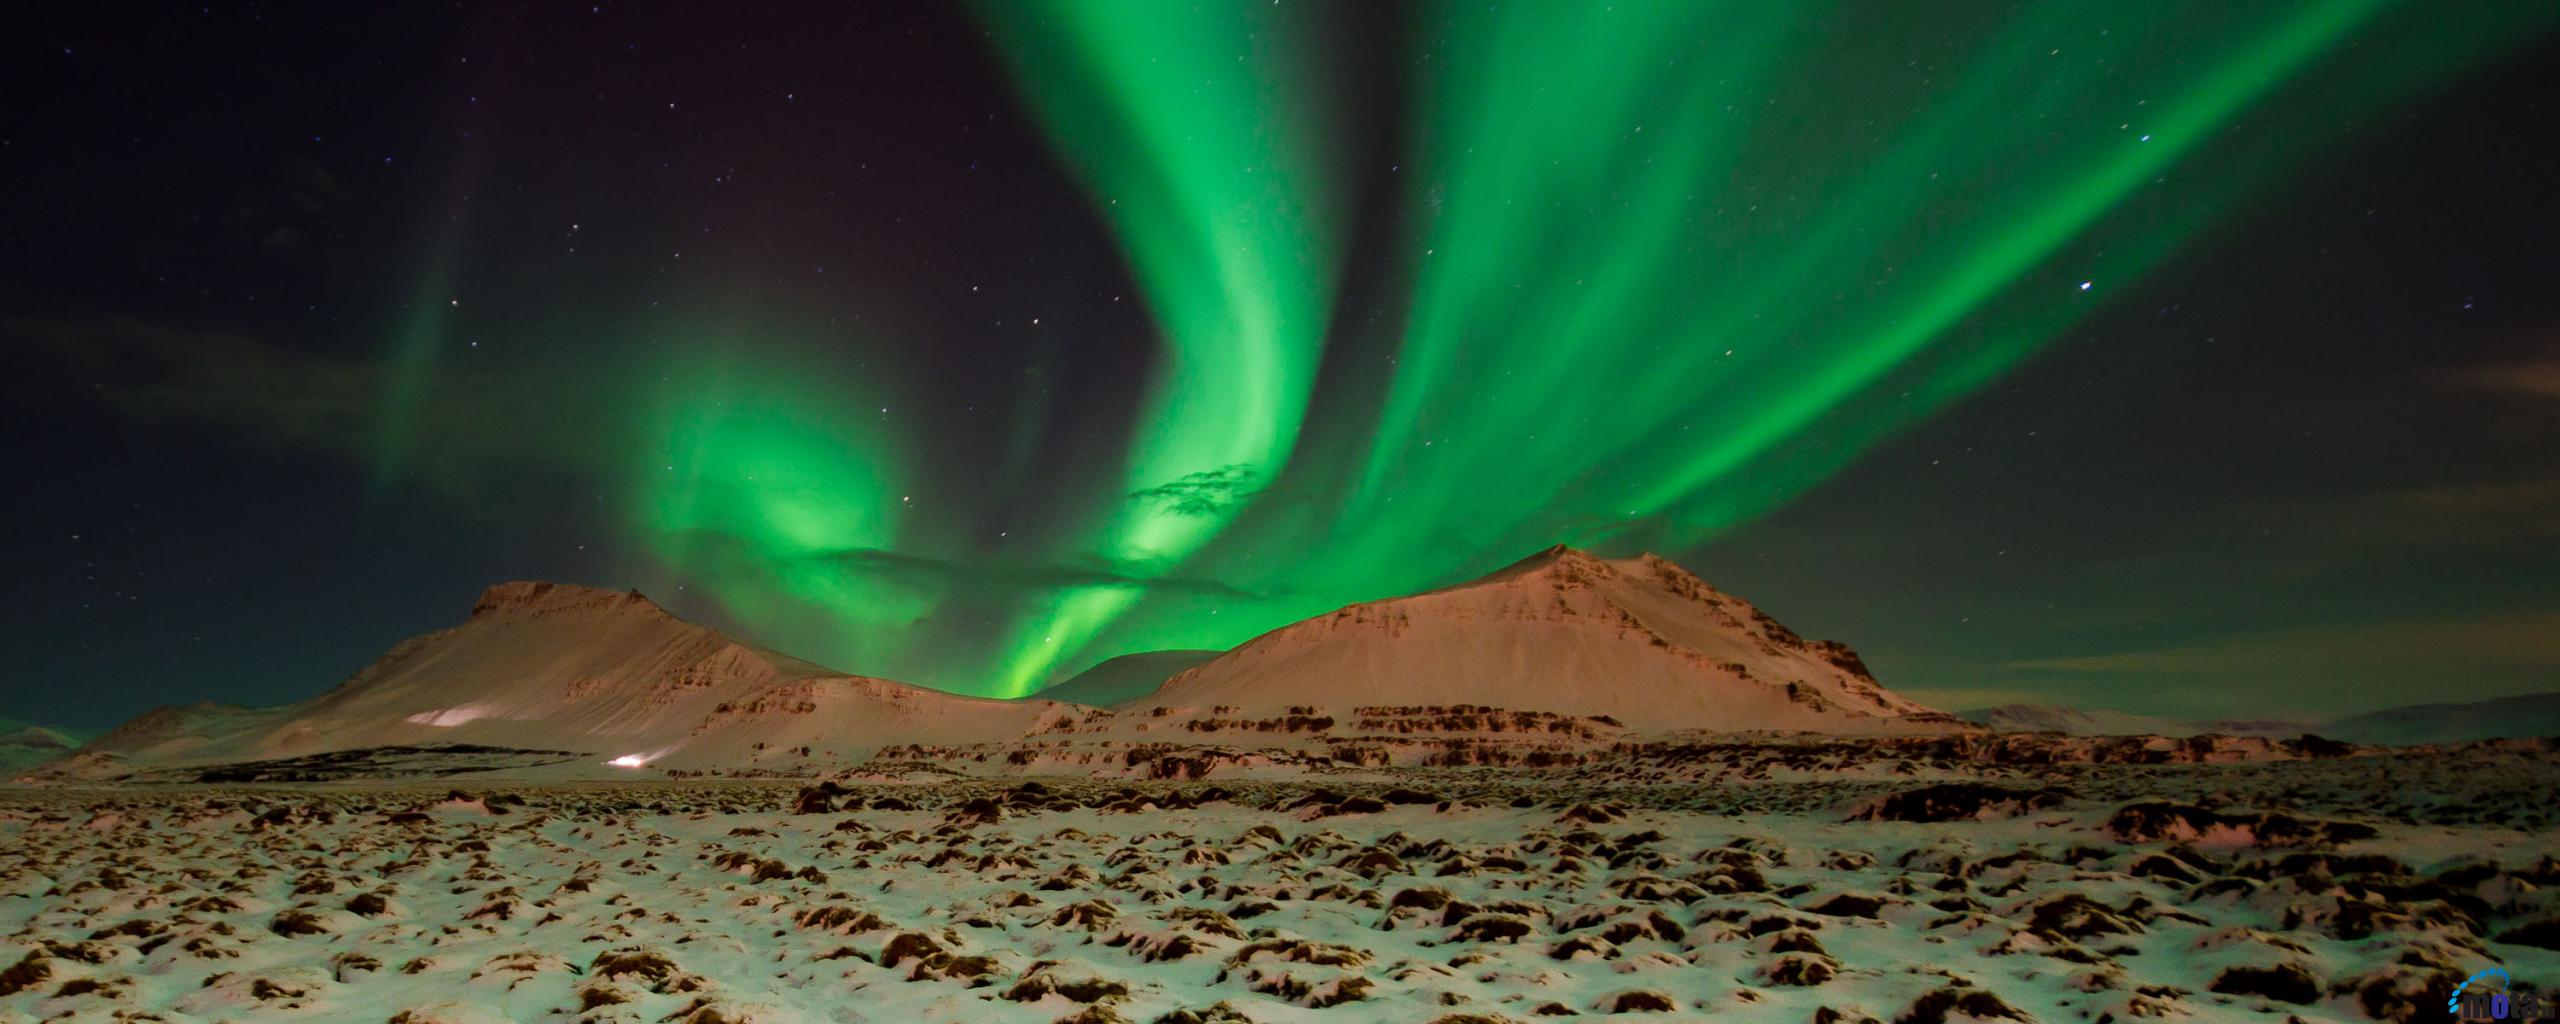 Wallpaper Northern Lights In Iceland X Dual